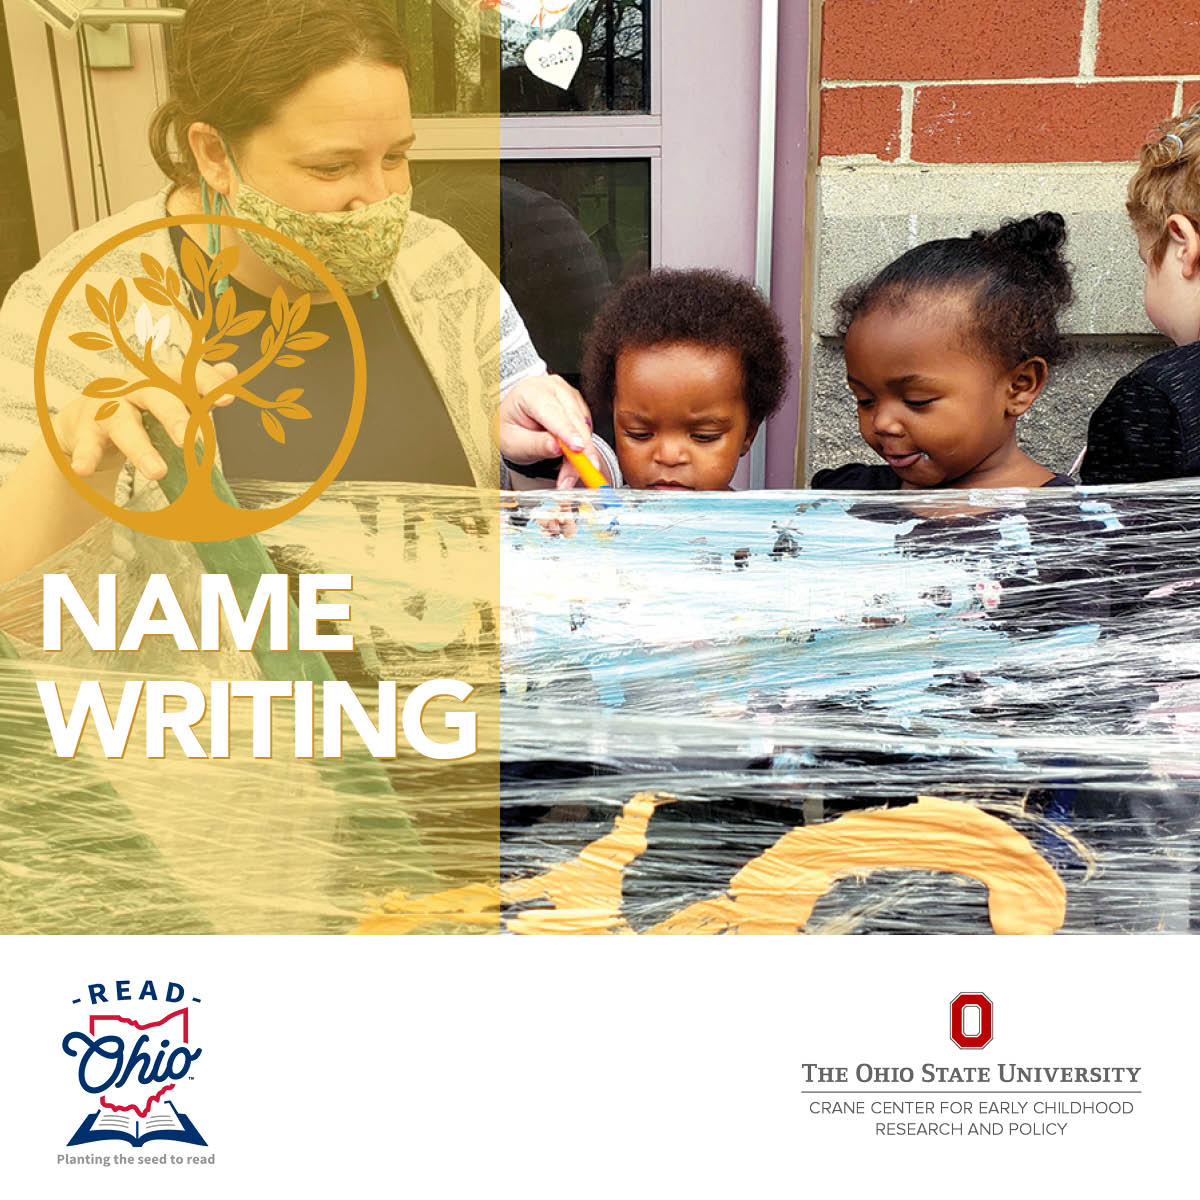 🖍️ Make writing fun! Provide crayons, pencils, or markers. Or get creative with shaving cream or Play-Doh. Use any materials that let your child get hands-on when learning letters! #ReadTogetherGrowTogether
Learn more at: go.osu.edu/RTGT